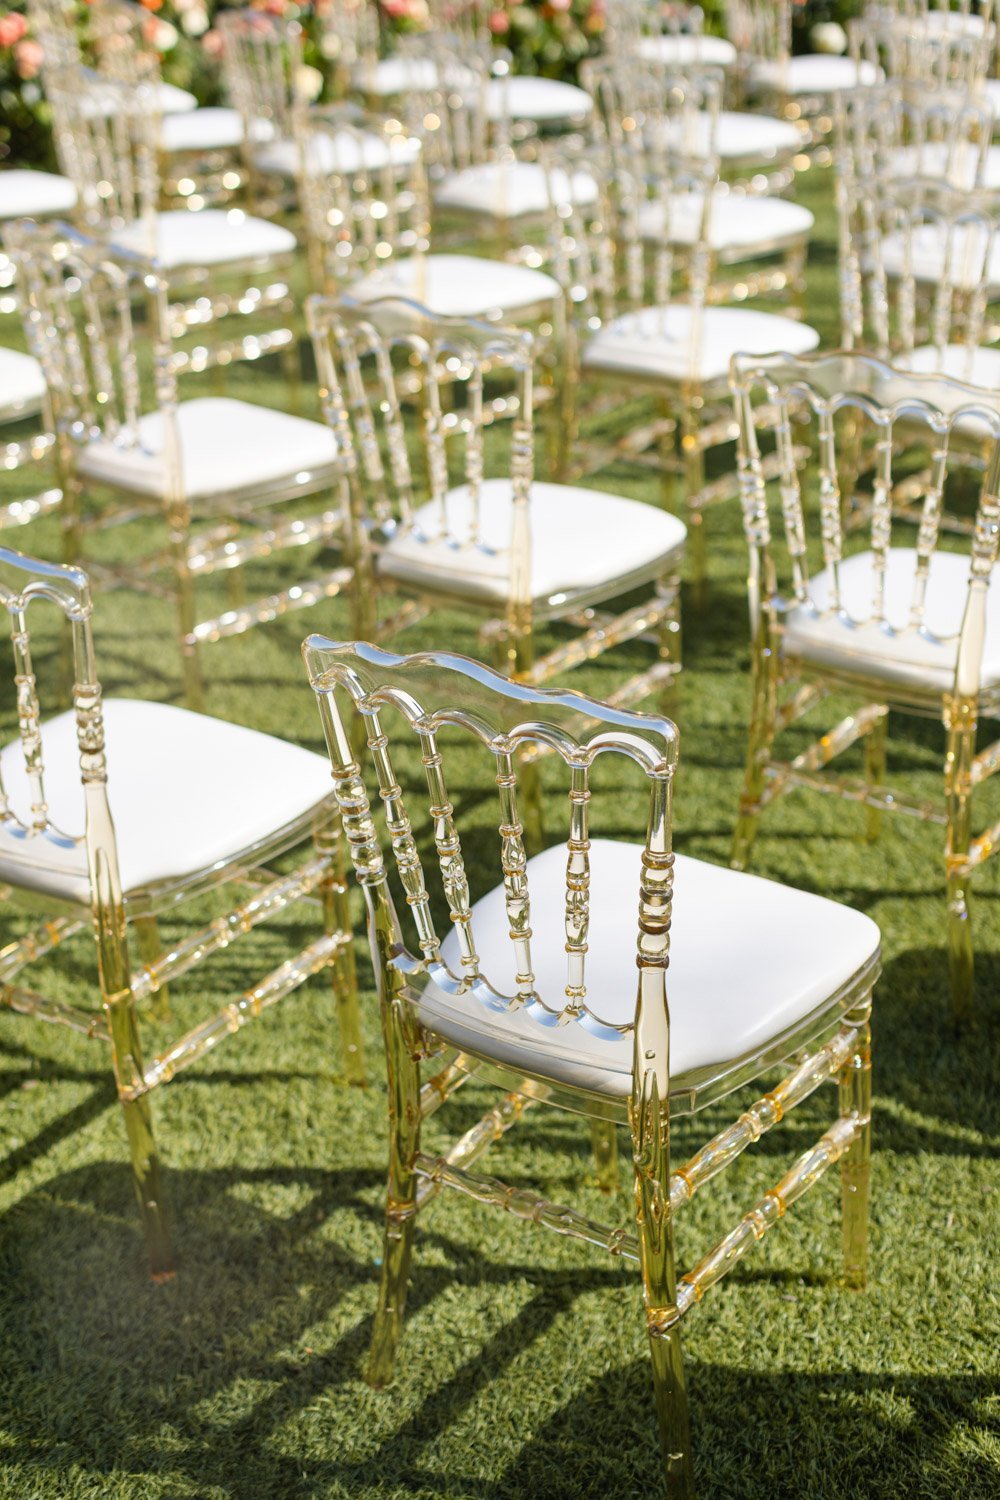 Clear crystal like chairs with gold and cream accents make up the ceremony seating at the Ritz-Carlton Laguna Niguel